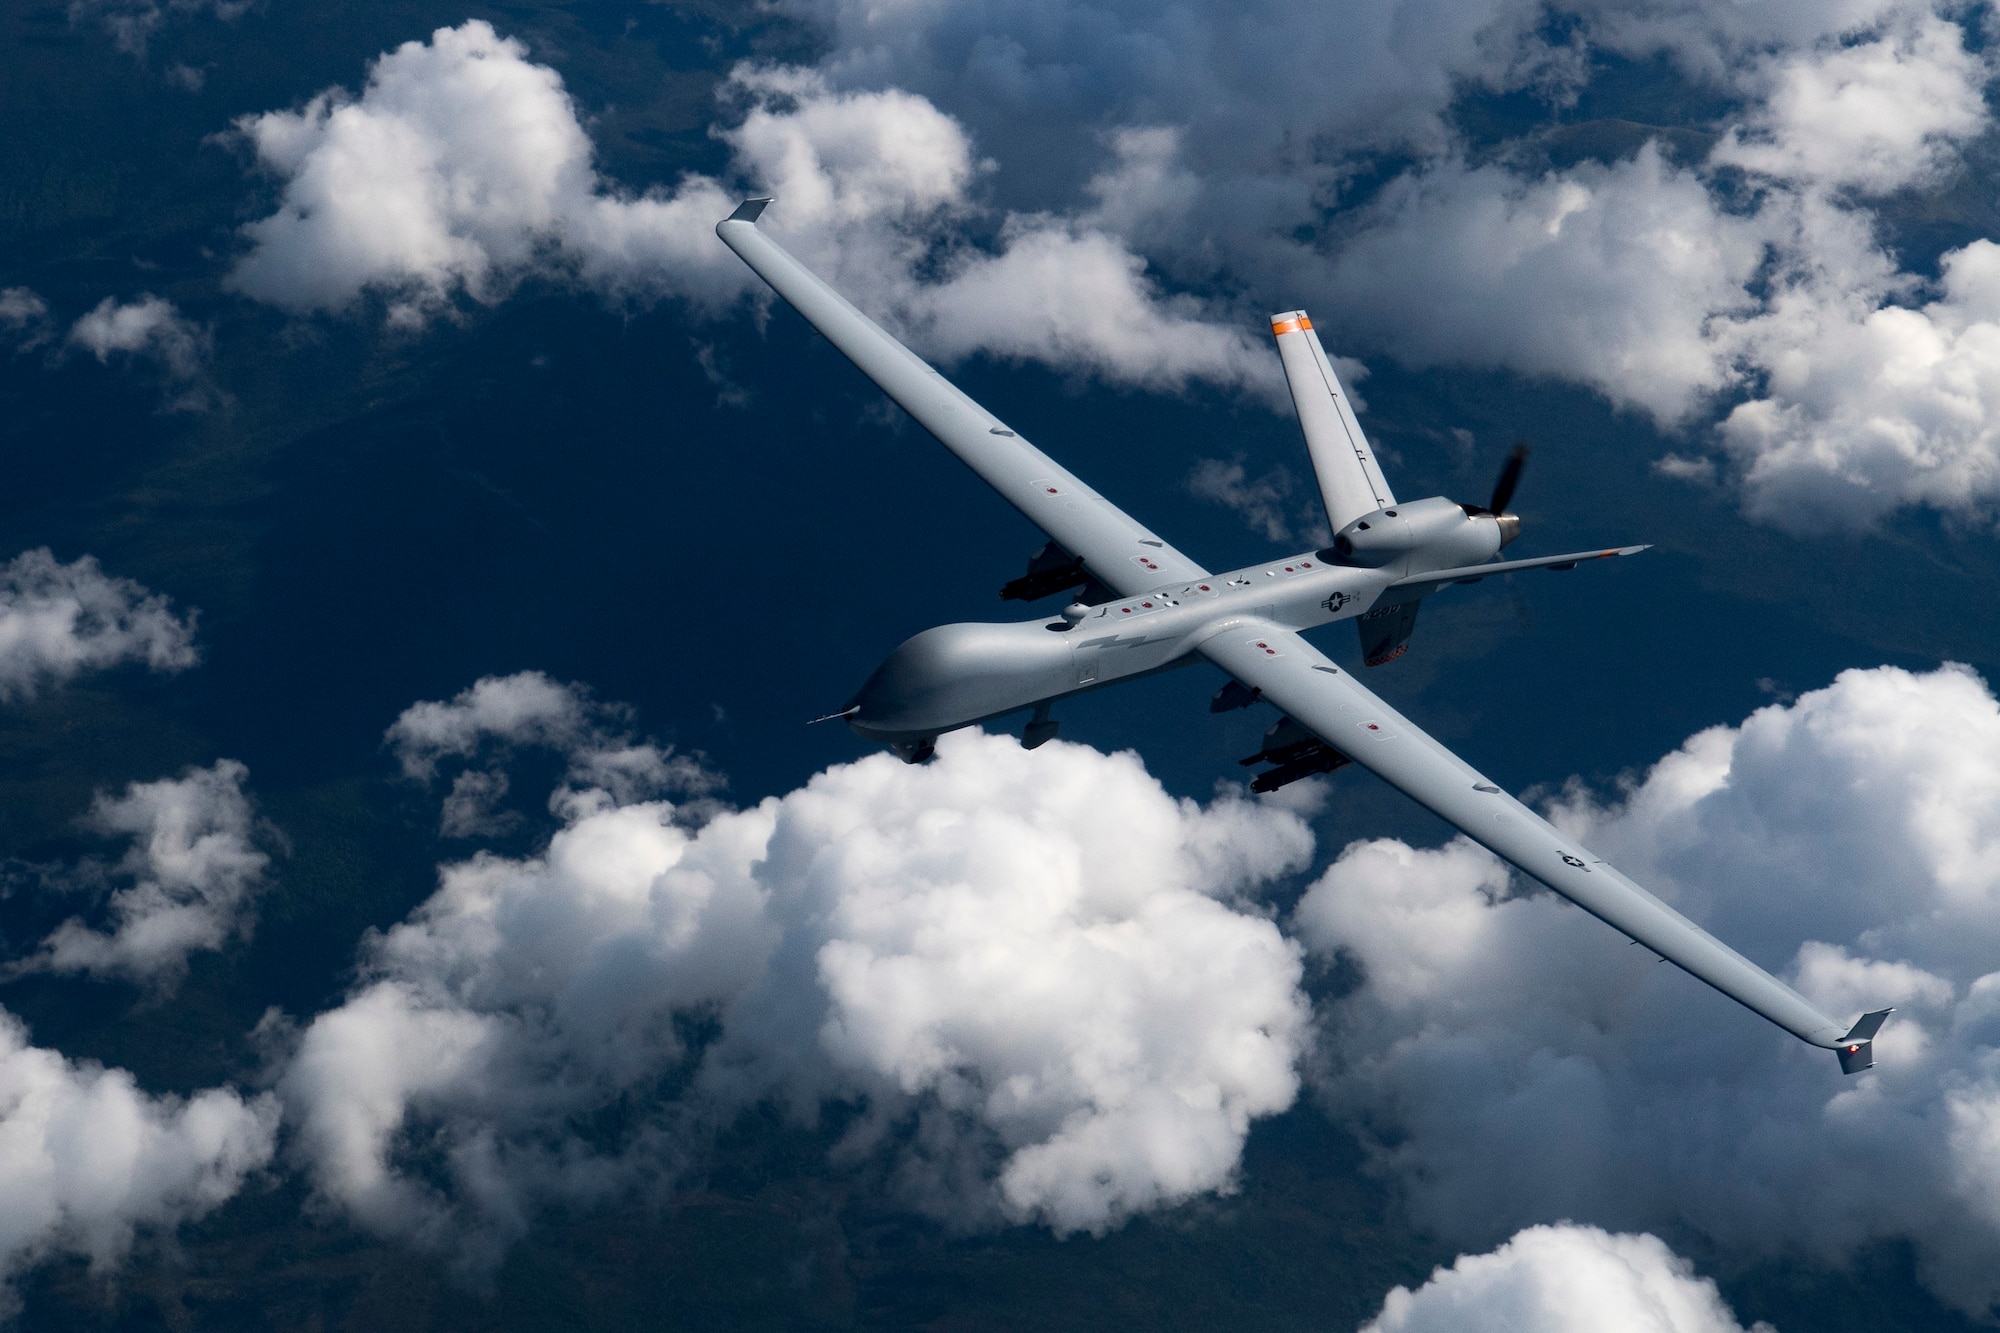 A U.S. Air Force MQ-9 Reaper flies during RED FLAG-Alaska 19-2, June 19 2019, at Eielson Air Force Base, Alaska.  This is the first time the MQ-9 aircraft participated in the Pacific Air Forces-sponsored exercise. The aircraft was controlled by Airmen of the 174th Attack Wing more than 4,000 miles away at their home station at Hancock Air Force Base, New York. (U.S. Air Force photo by Senior Airman Daniel Snider)